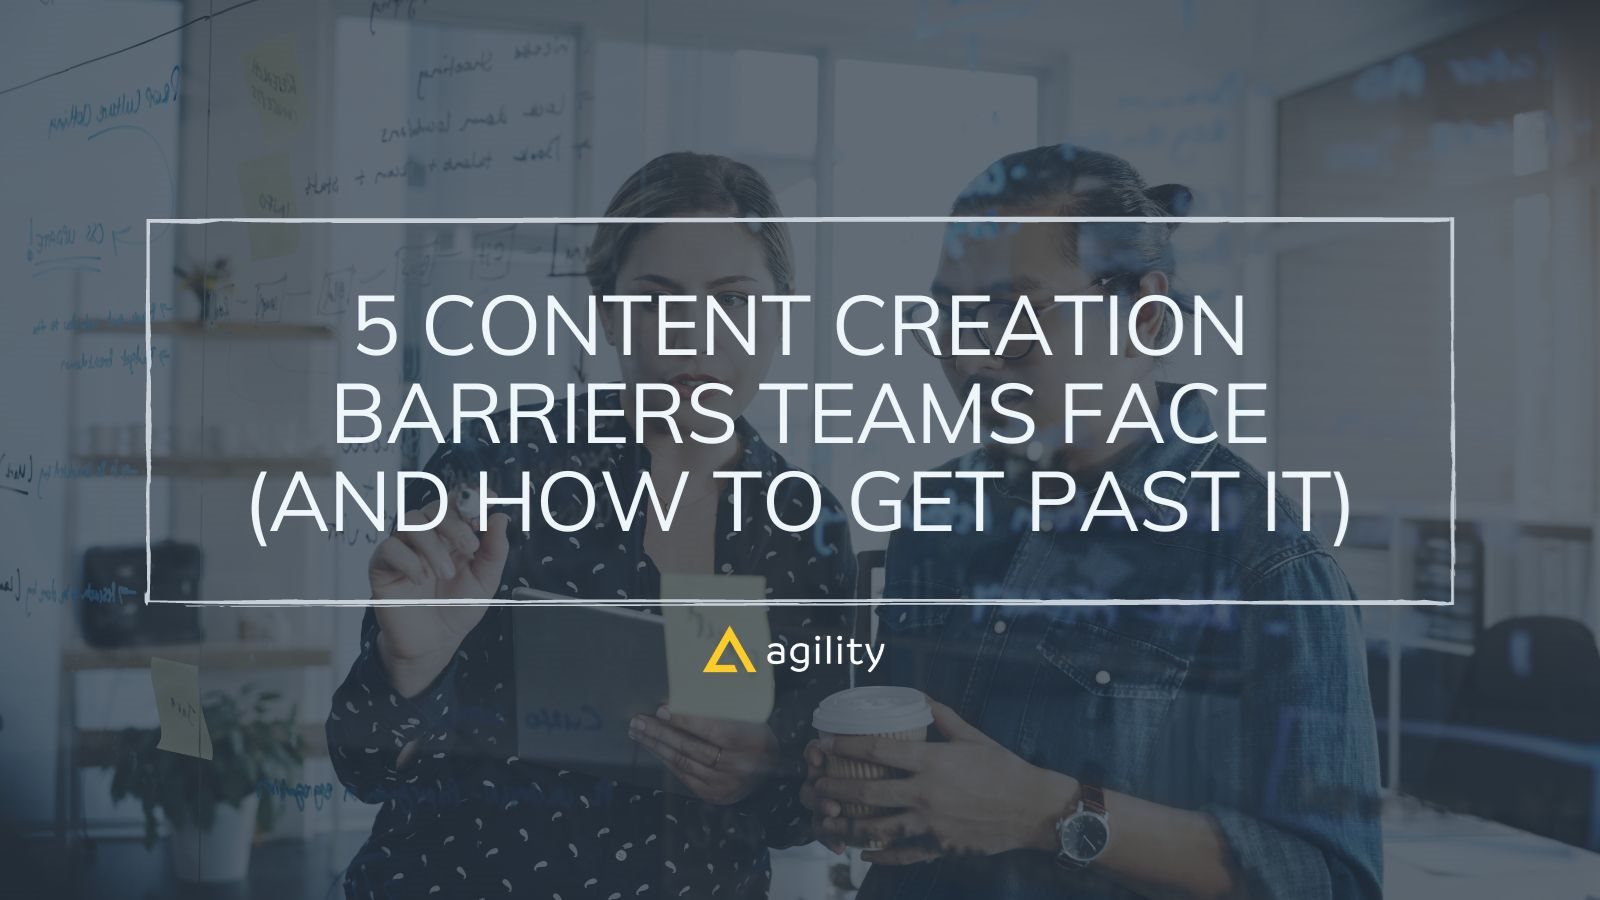 5 Content Creation Barriers Teams Face